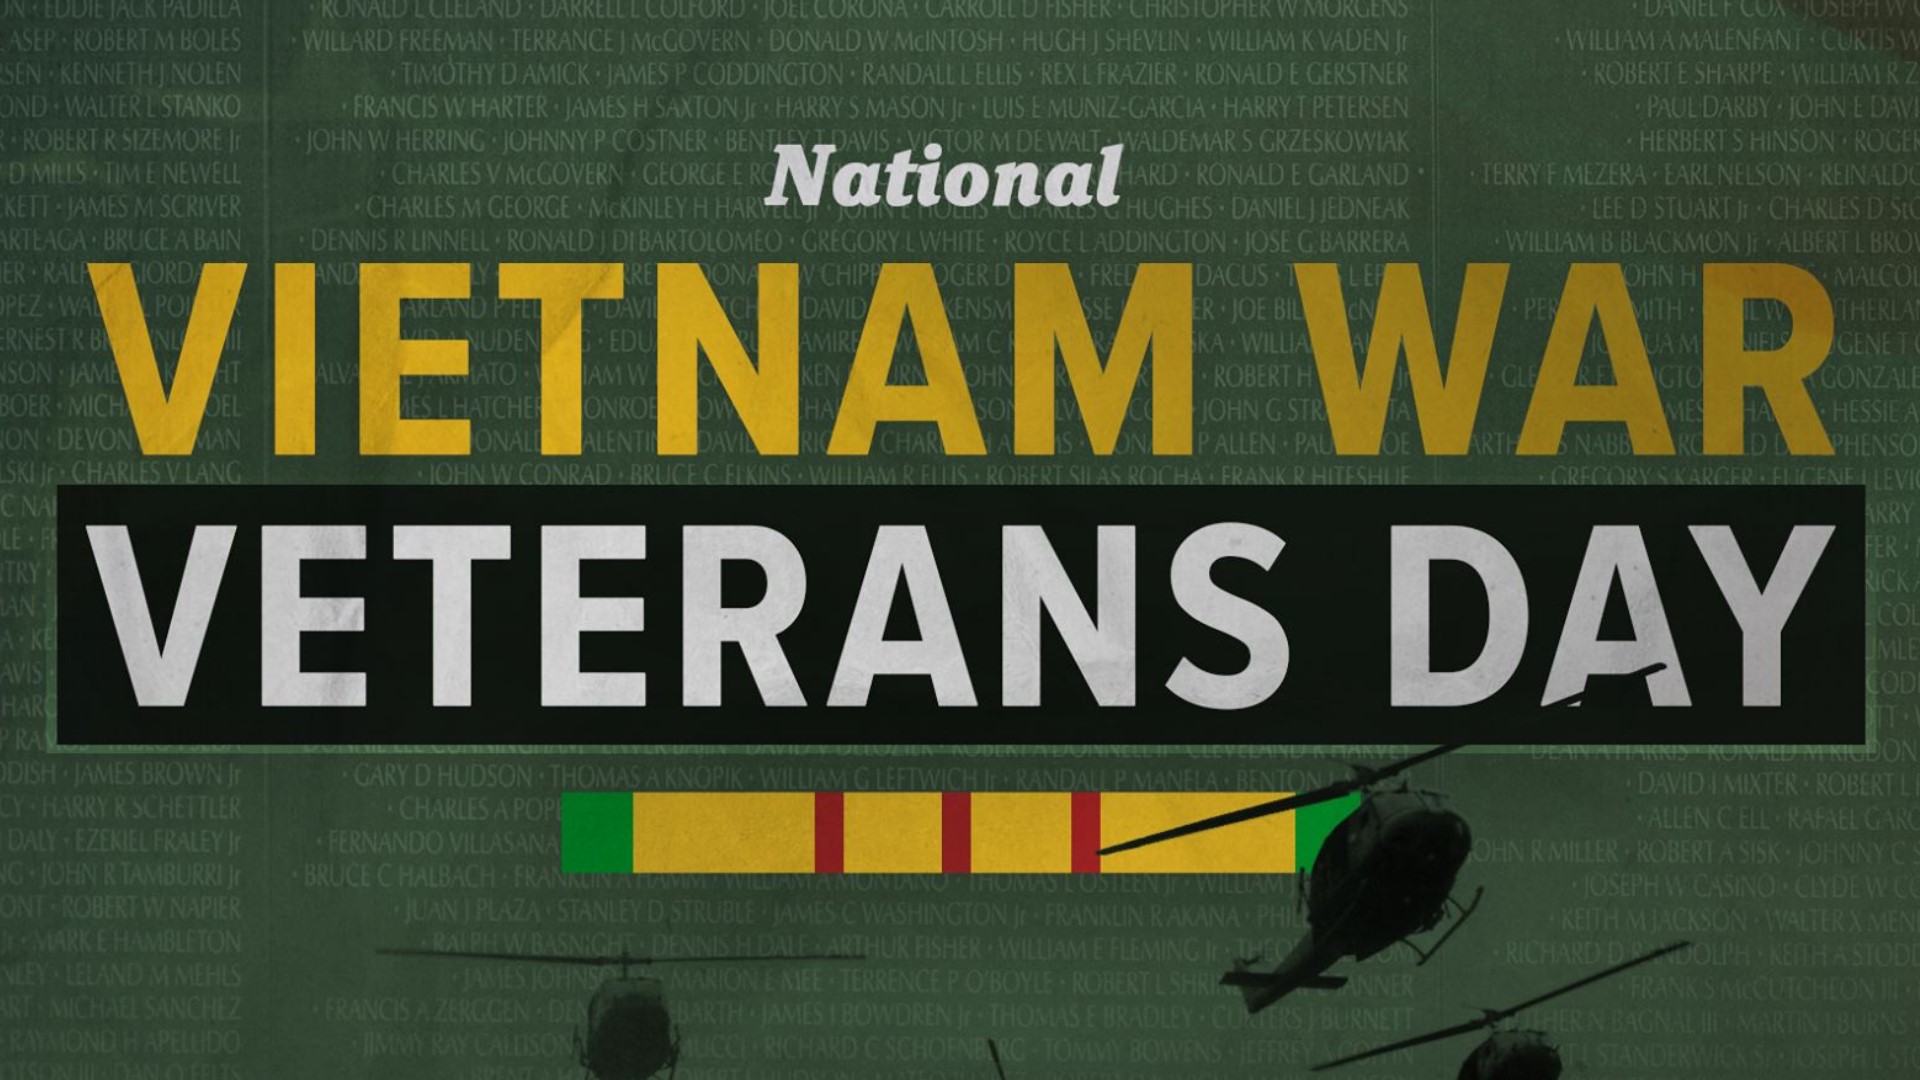 USDOD: Between 1964 and 1973, millions of Americans deployed to Southeast Asia to fight in the Vietnam War. Today, we pause for National Vietnam War Veterans Day to recognize the veterans who served in the war and thank them for their service.